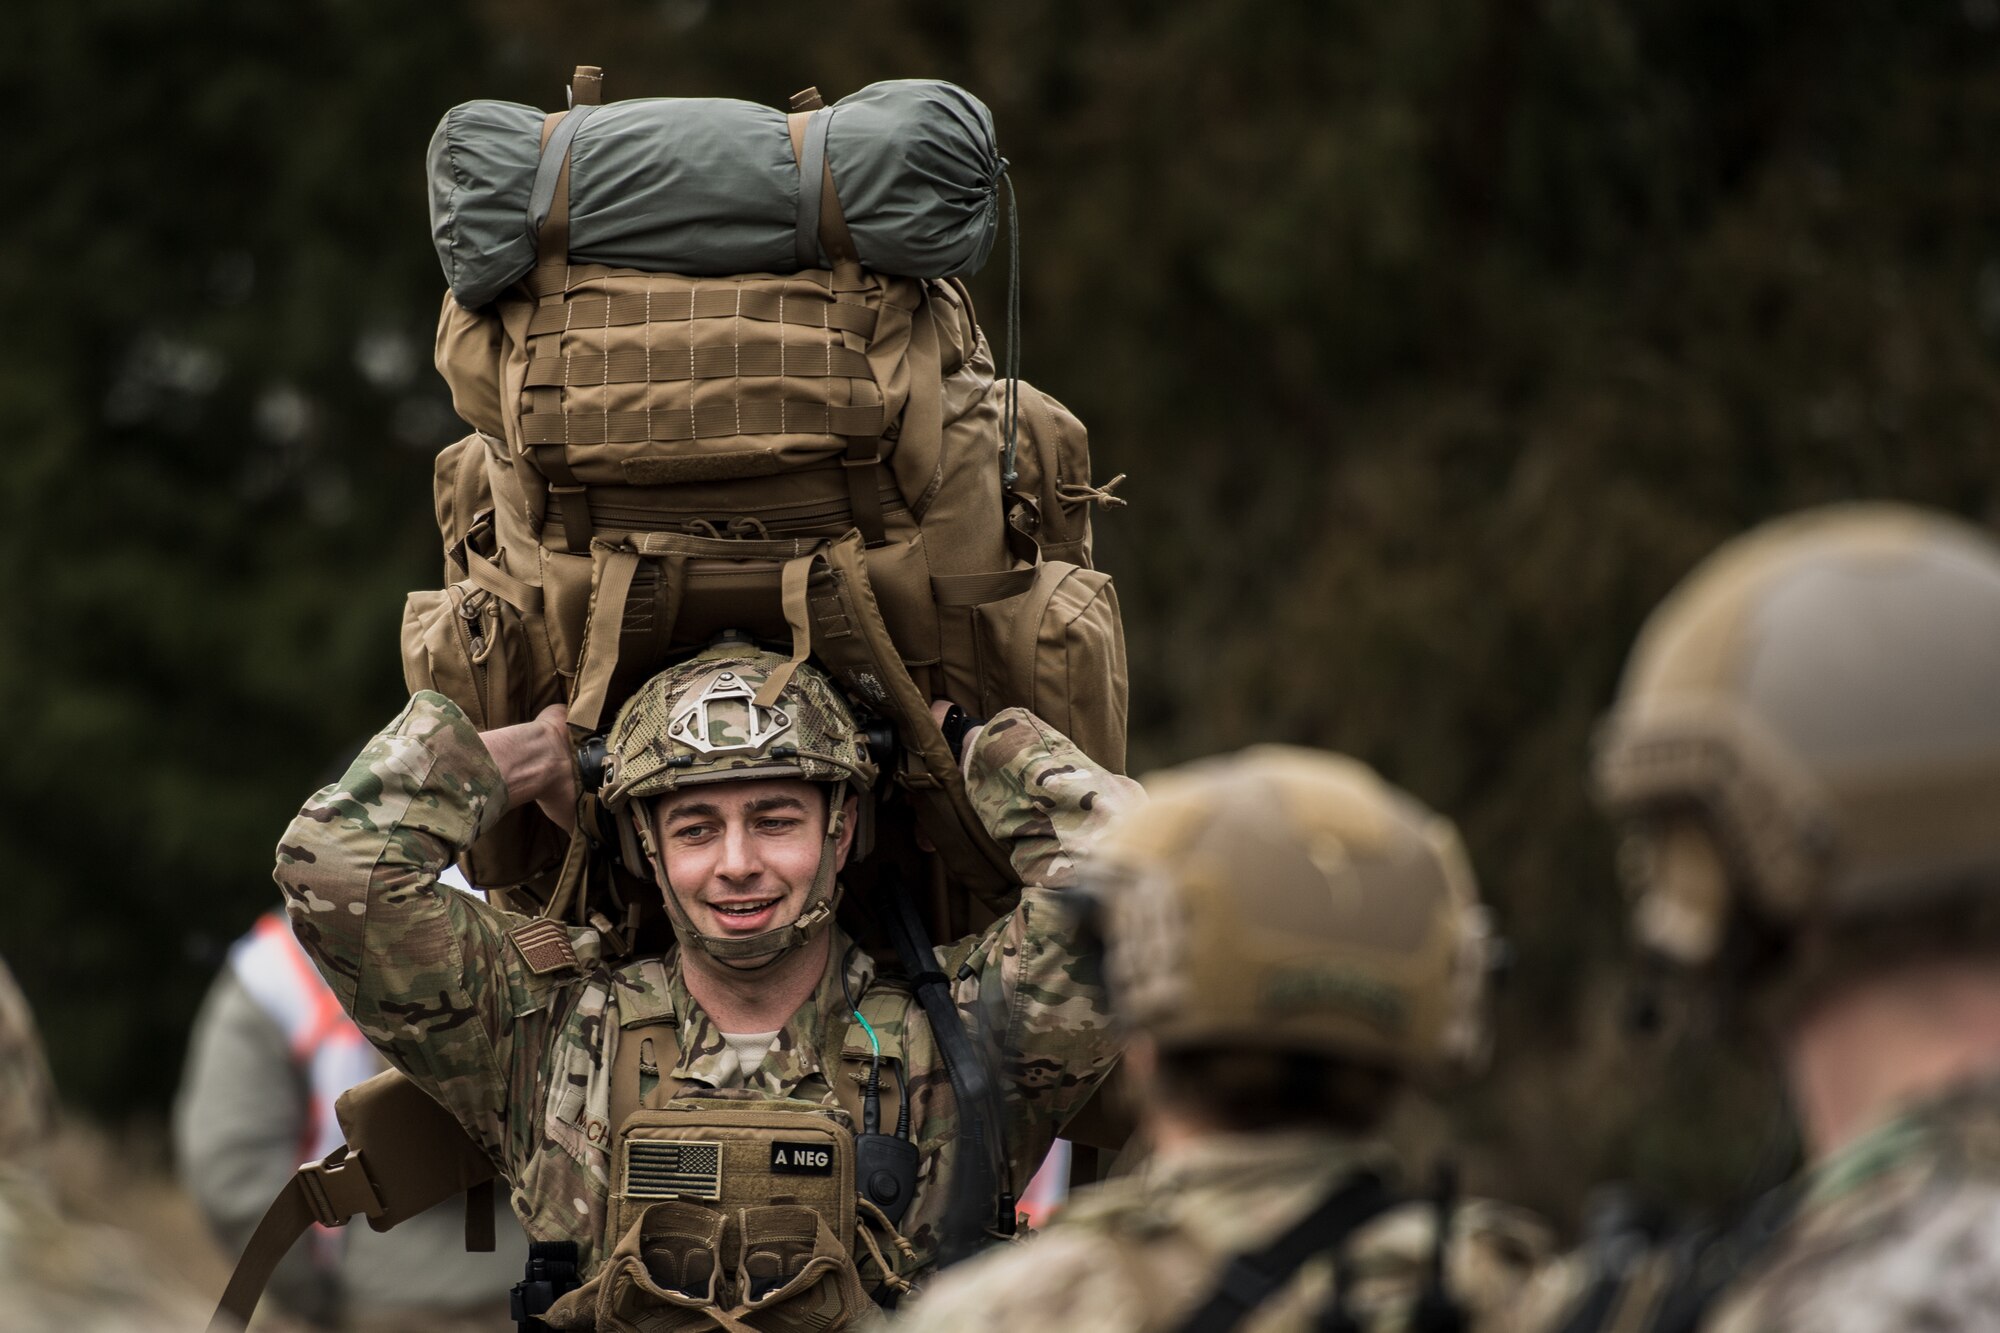 U.S. Air Force Staff Sgt. Mark Melchiori, 435th Security Forces Squadron contingency response fire-team leader, hoists a rucksack over his head after stepping off a bus for exercise Frozen Defender in Grostenquin, France, Jan. 14, 2020. Frozen Defender tests the squadron’s capabilities in a contested environment under harsh conditions. The 435th SFS Defenders must be physically prepared to carry more than 70 lbs of equipment into these environments. (U.S. Air Force photo by Staff Sgt. Devin Boyer)